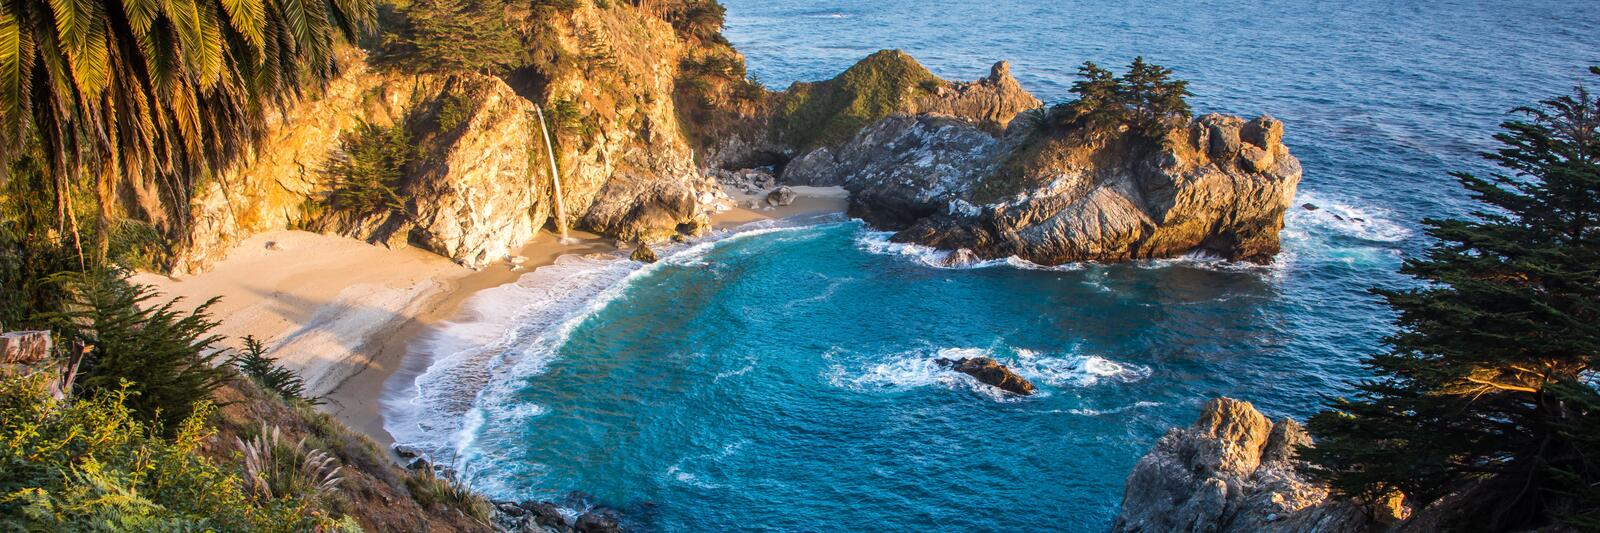 Wallpapers waterfall Big Sur McWay Cove Beach on the desktop